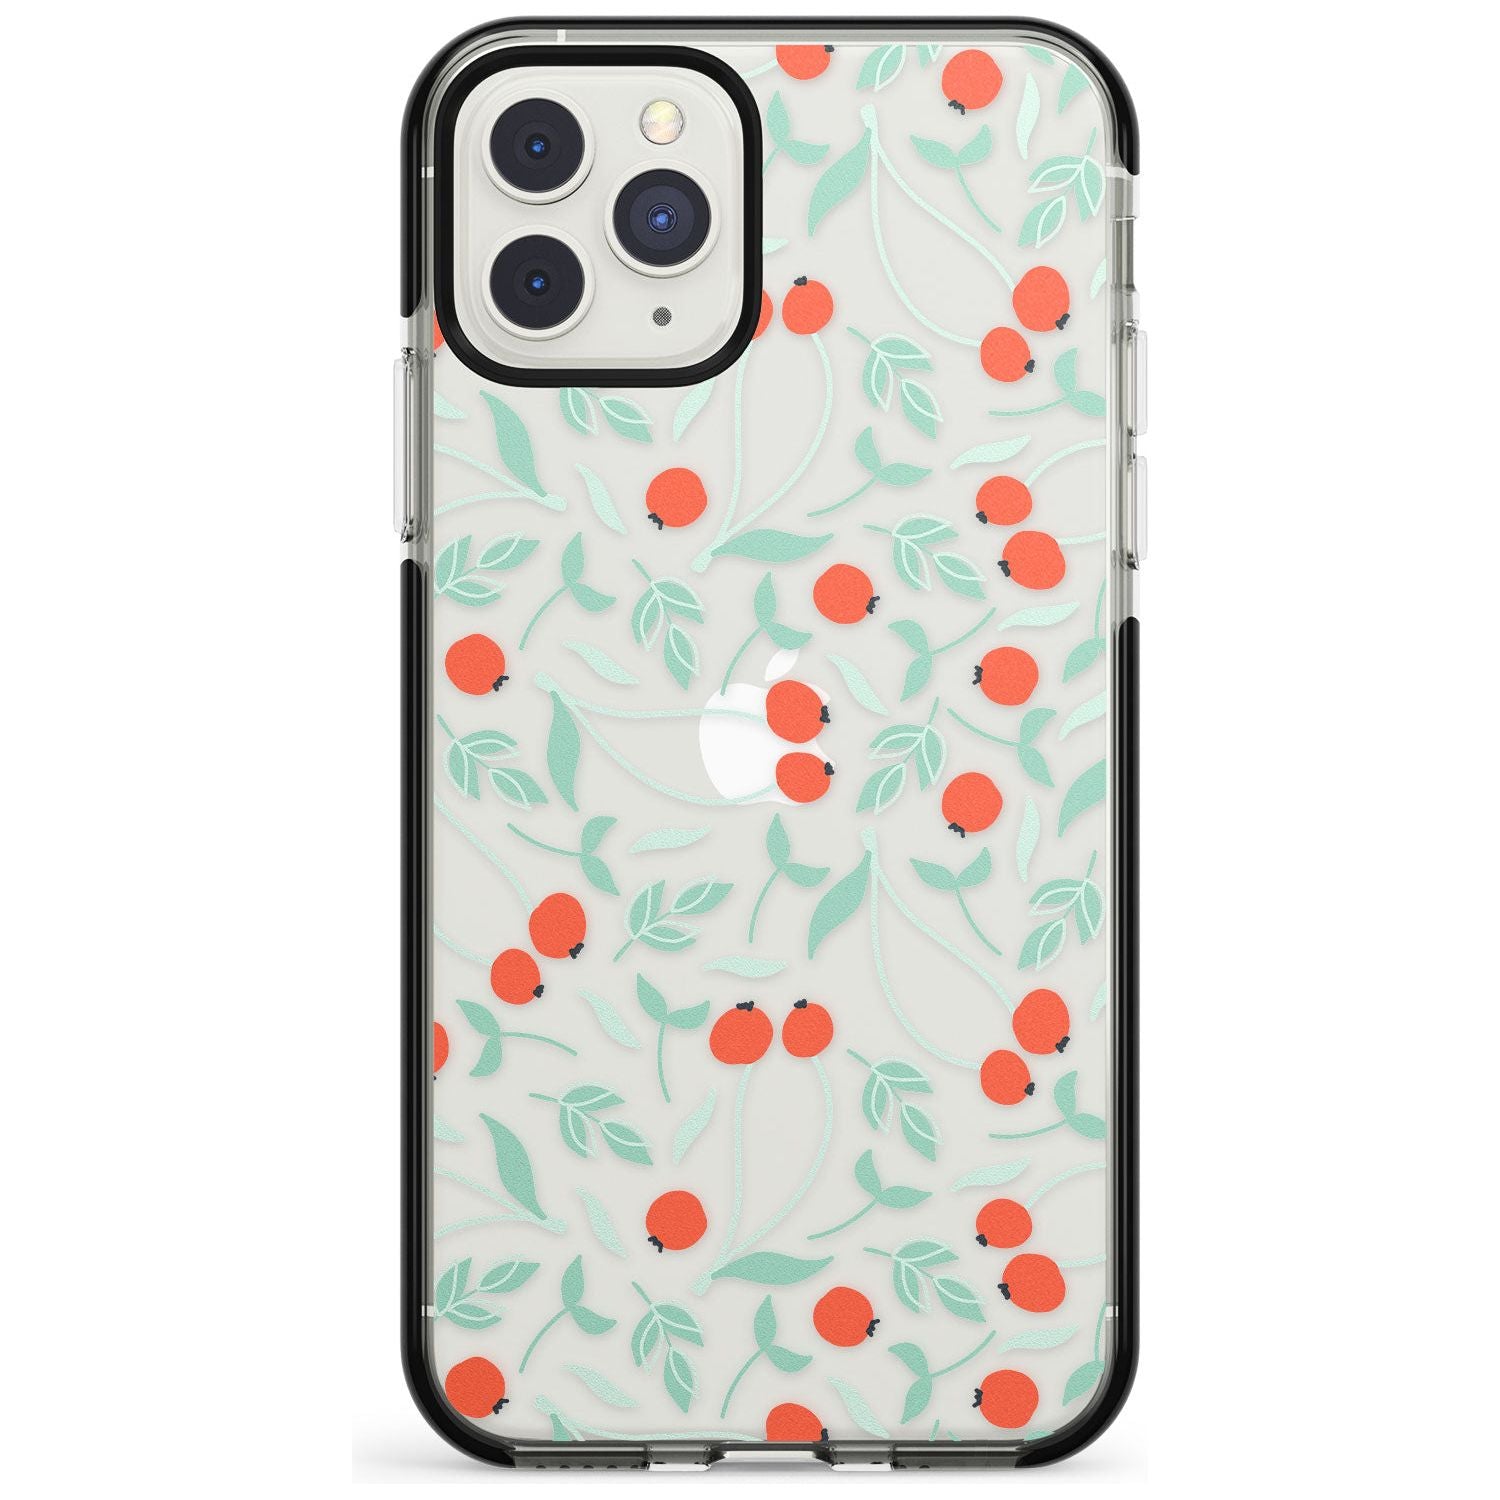 Red Berries Transparent Floral Black Impact Phone Case for iPhone 11 Pro Max